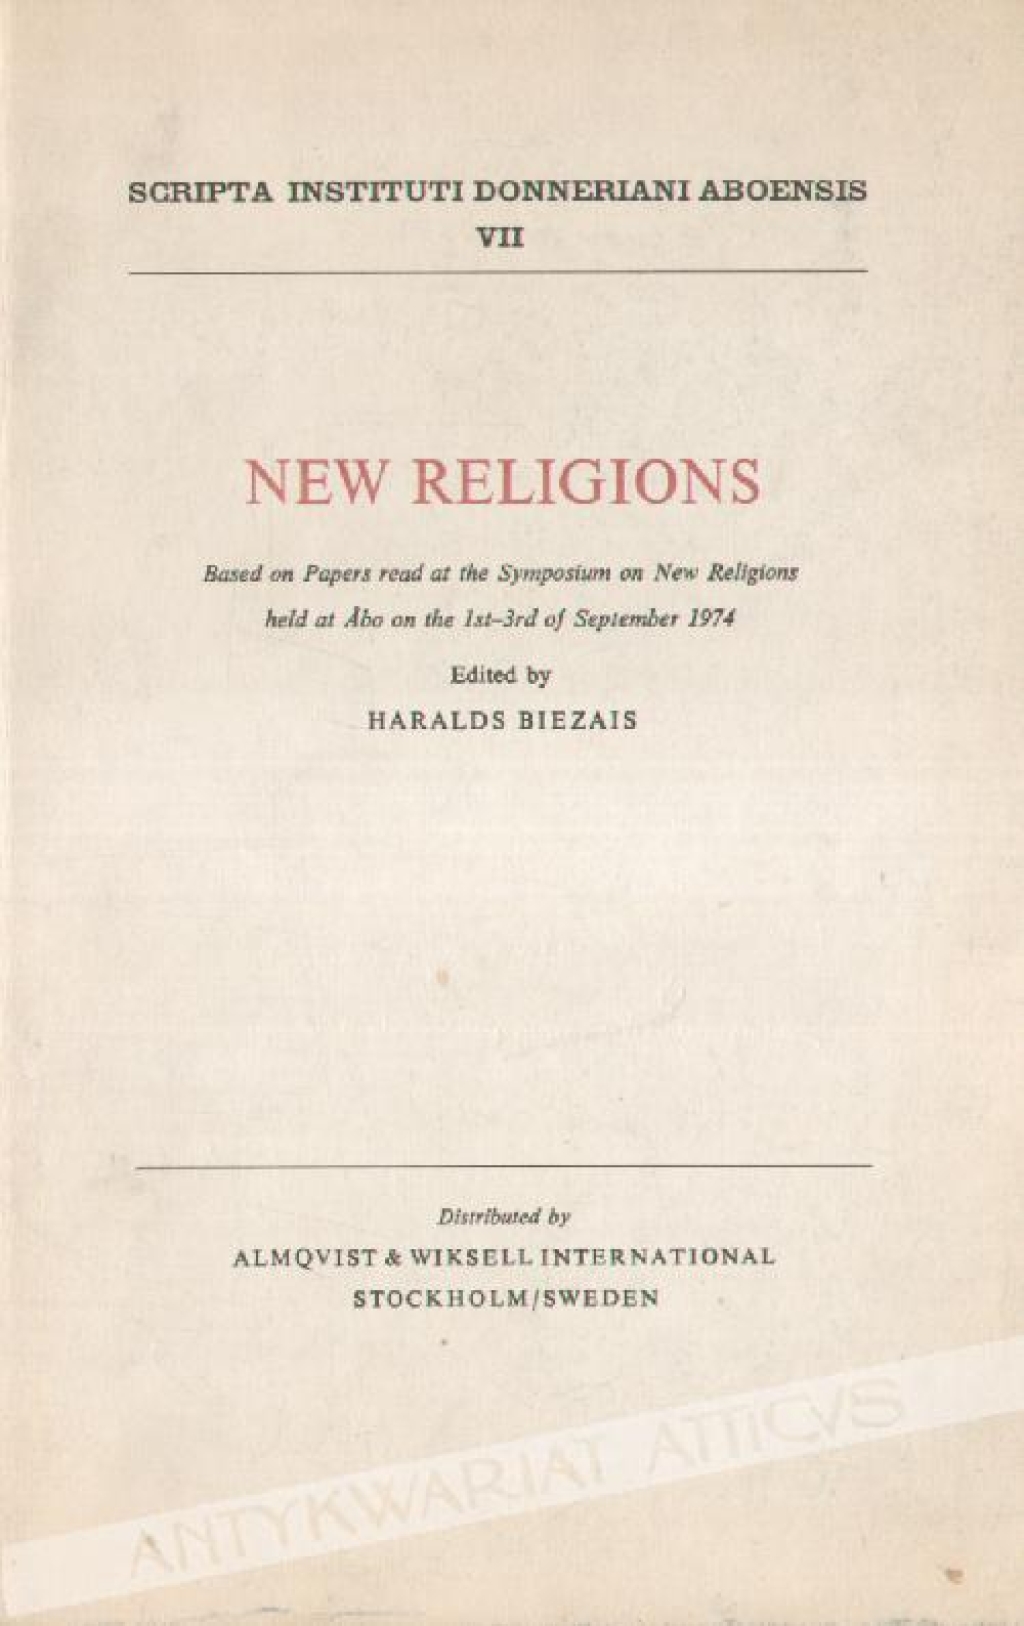 New Religions. Based on Papers read at the Symposium on New Religions held at Abo on the 1st-3rd of September 1974